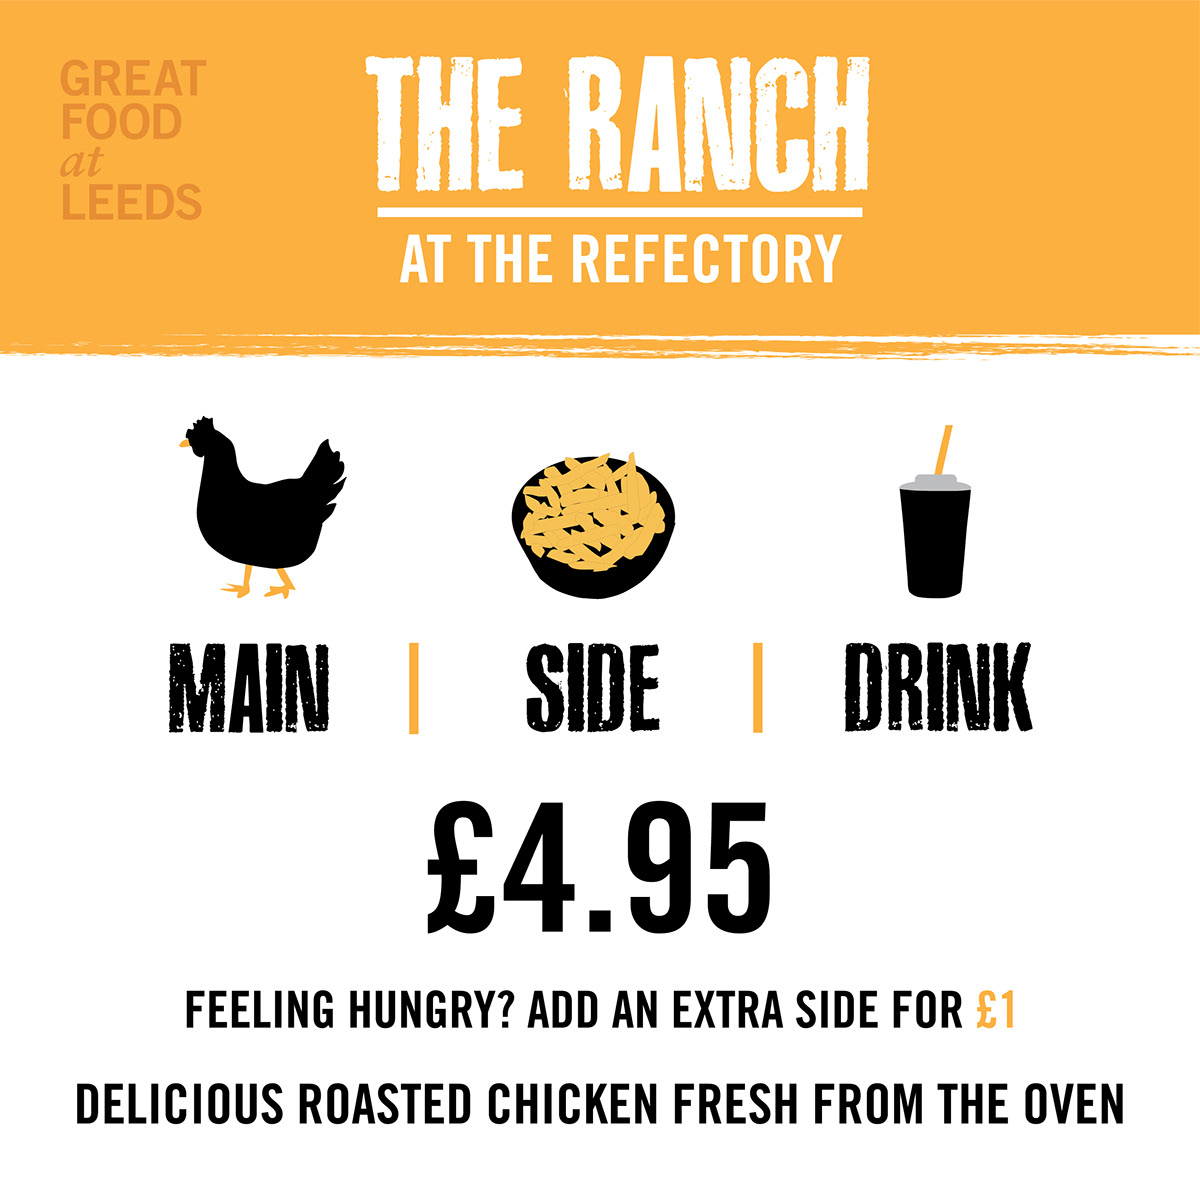 university of leeds refectory menu GFAL Great food at leeds Students Food  Promotion internship chicken delicious fresh Sustainable the ranch